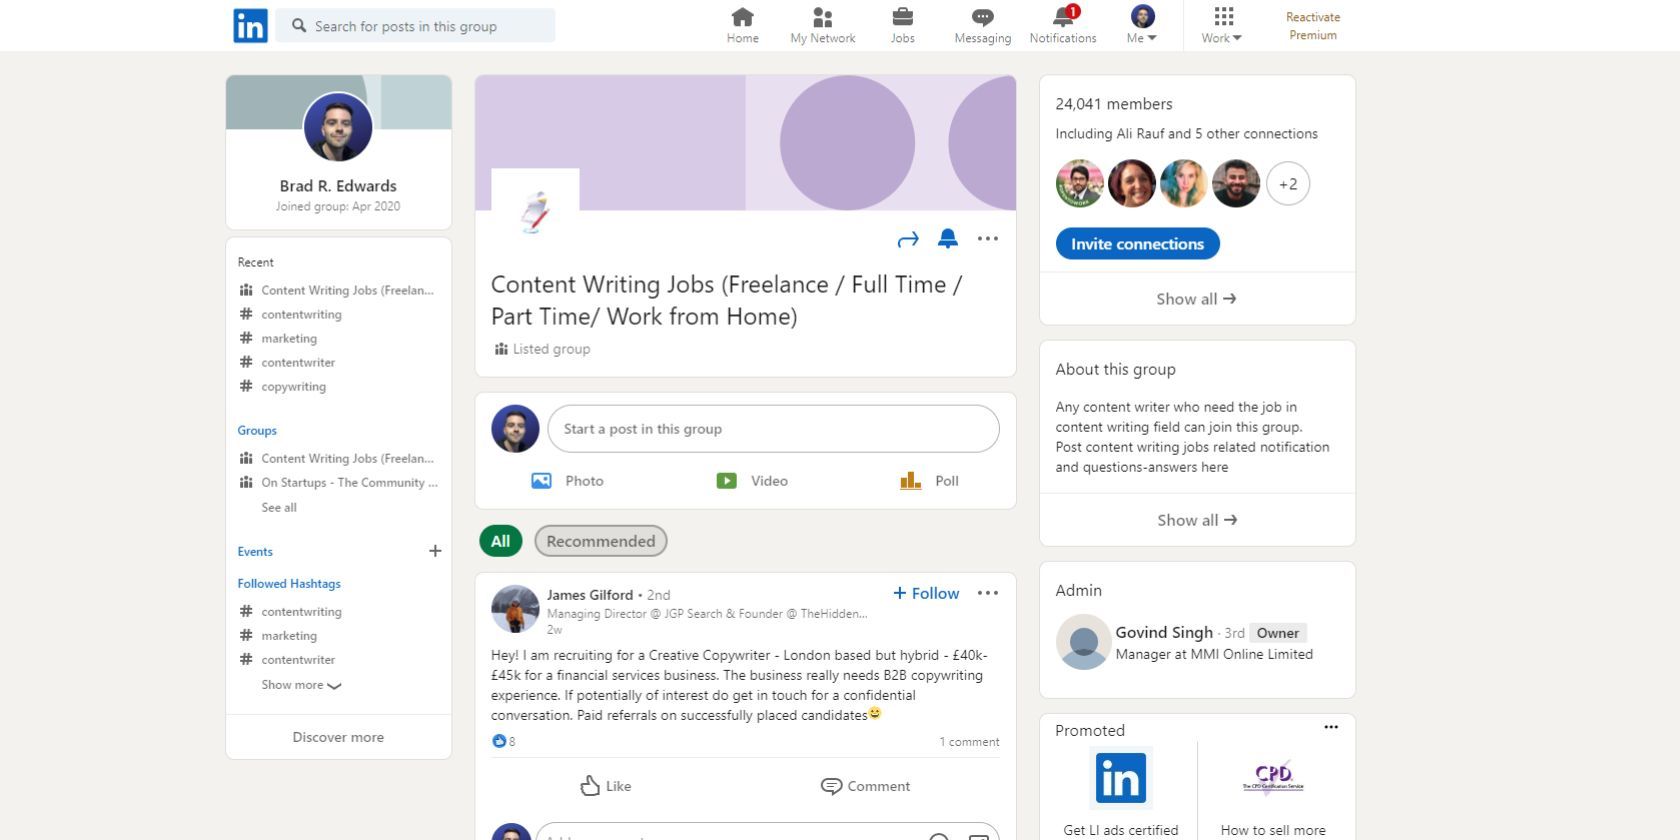 The LinkedIn Groups page displaying a timeline on a content writing group